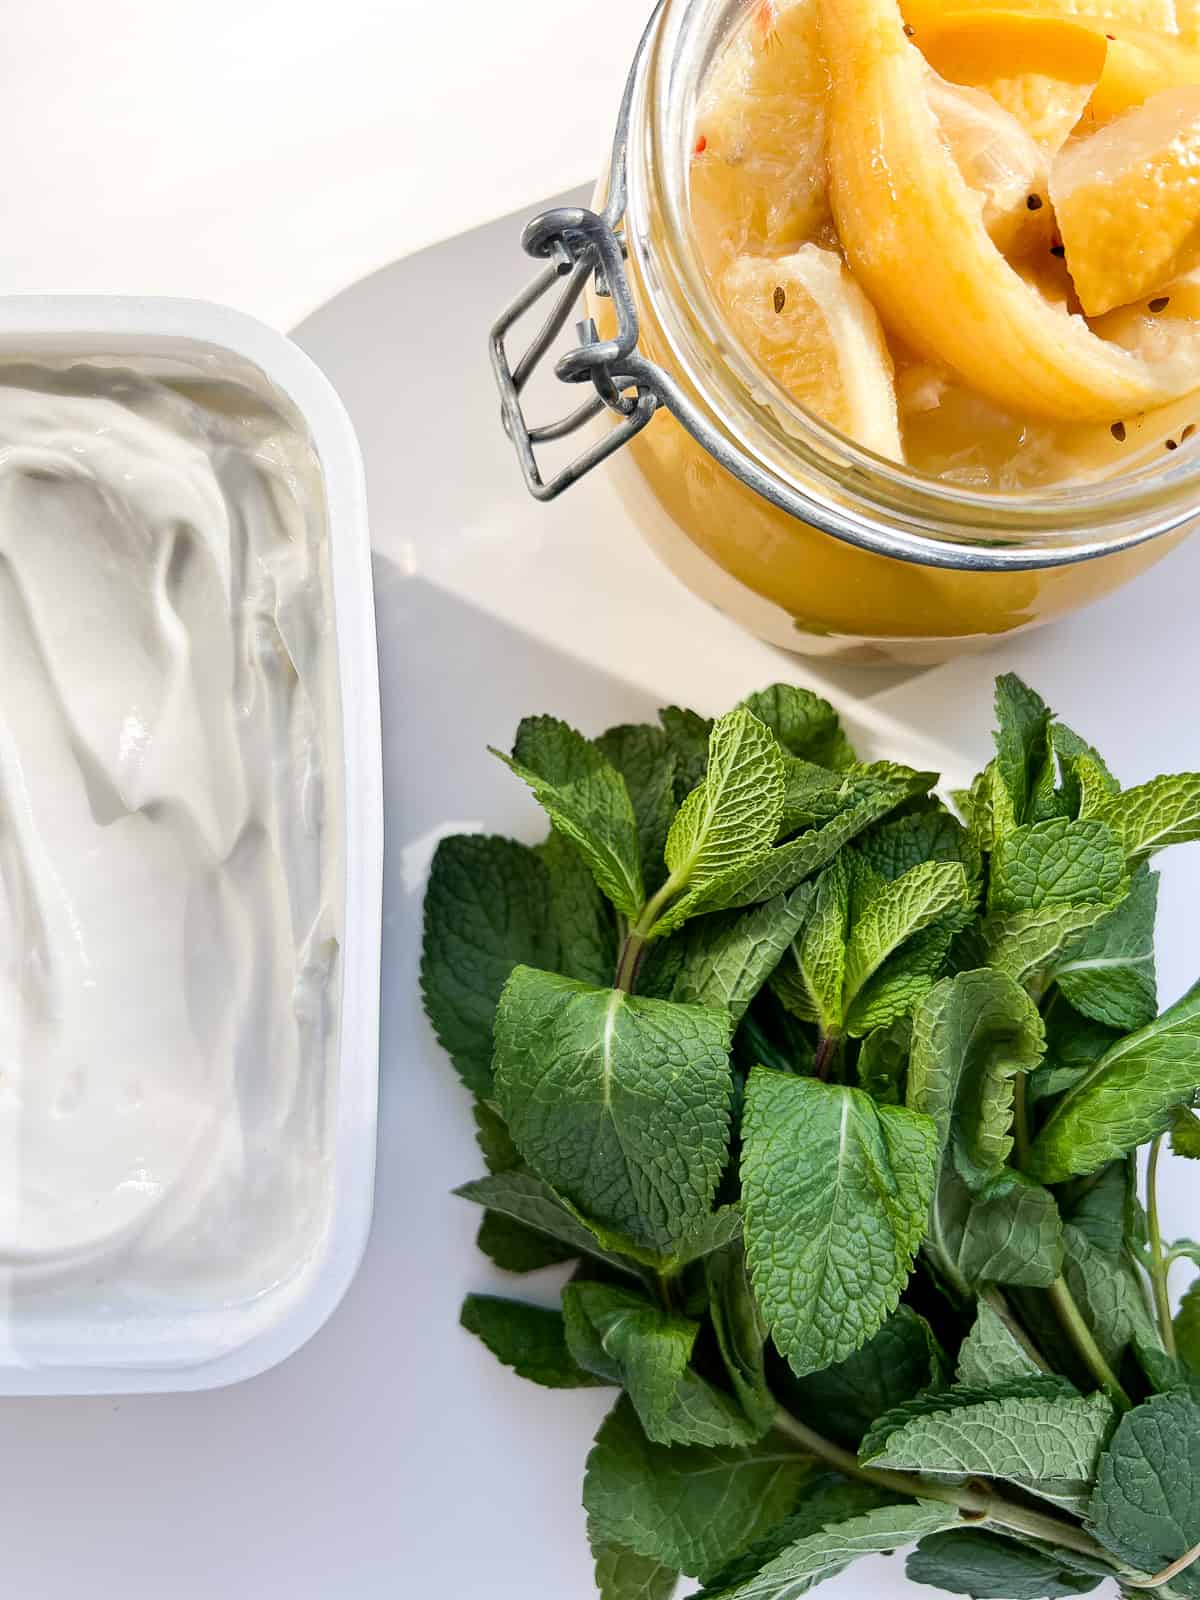 An image of the three ingredients needed for the labneh mixture used in this recipe.